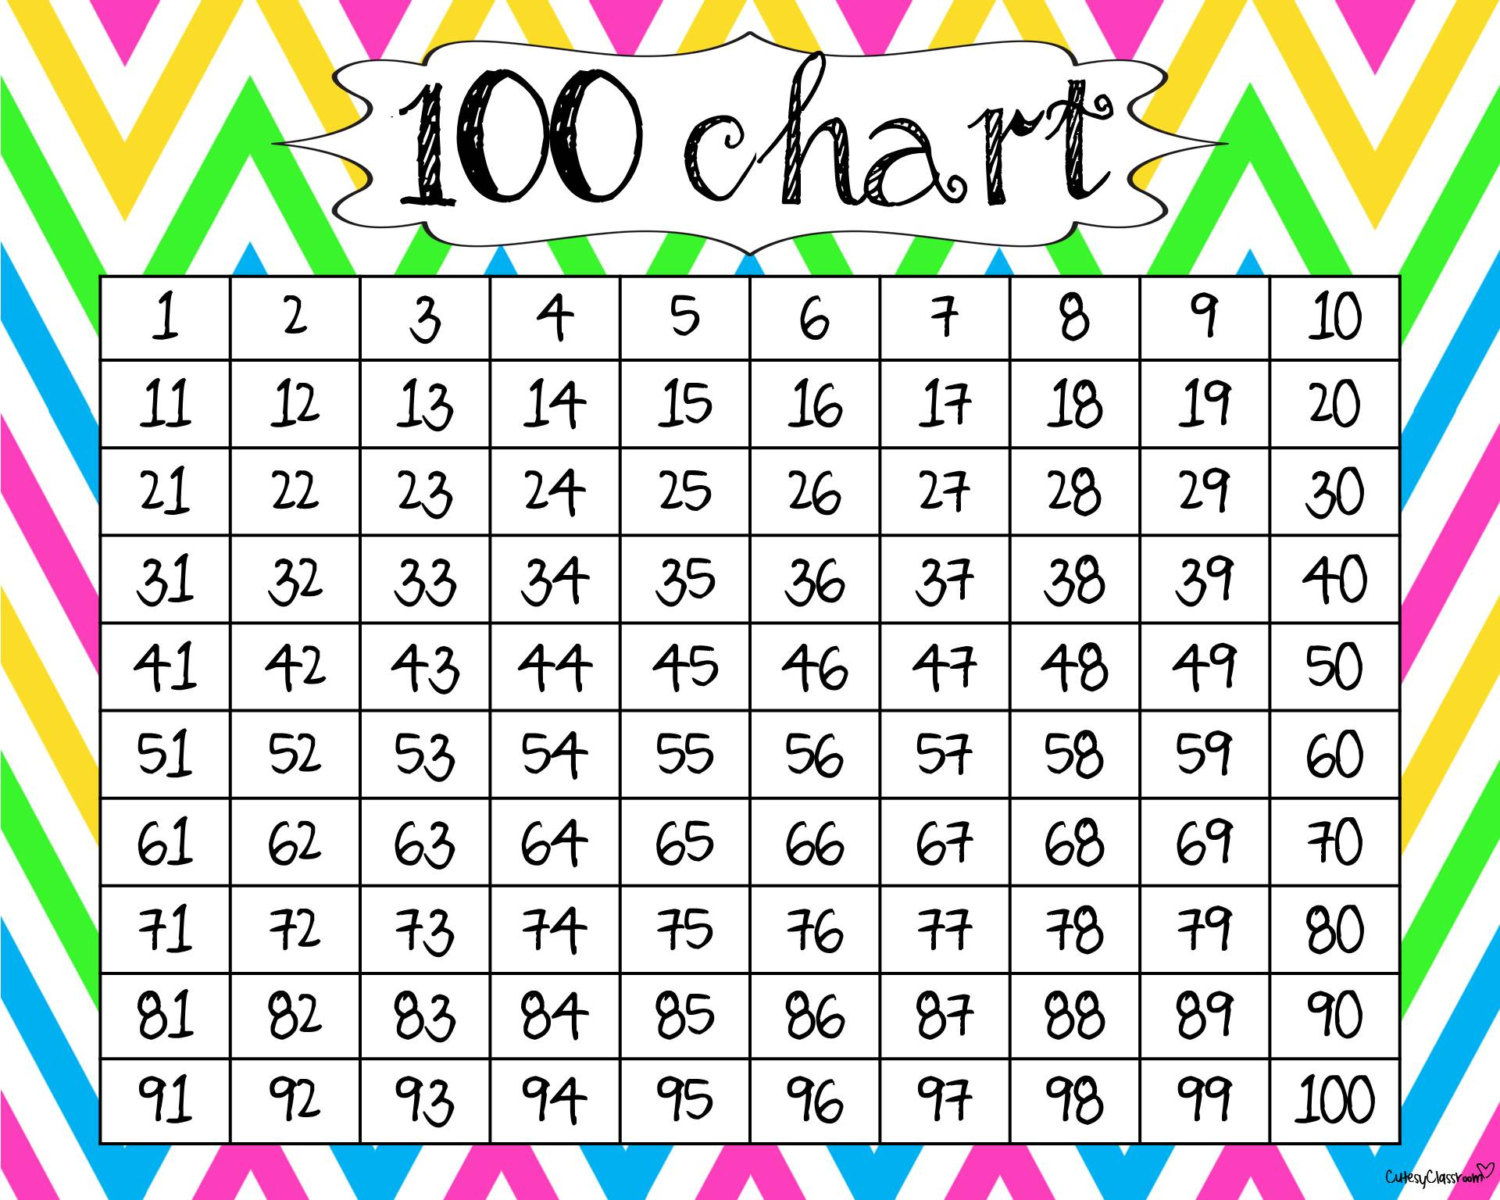 6-best-images-of-large-printable-hundreds-chart-hundred-printable-100-chart-free-hundred